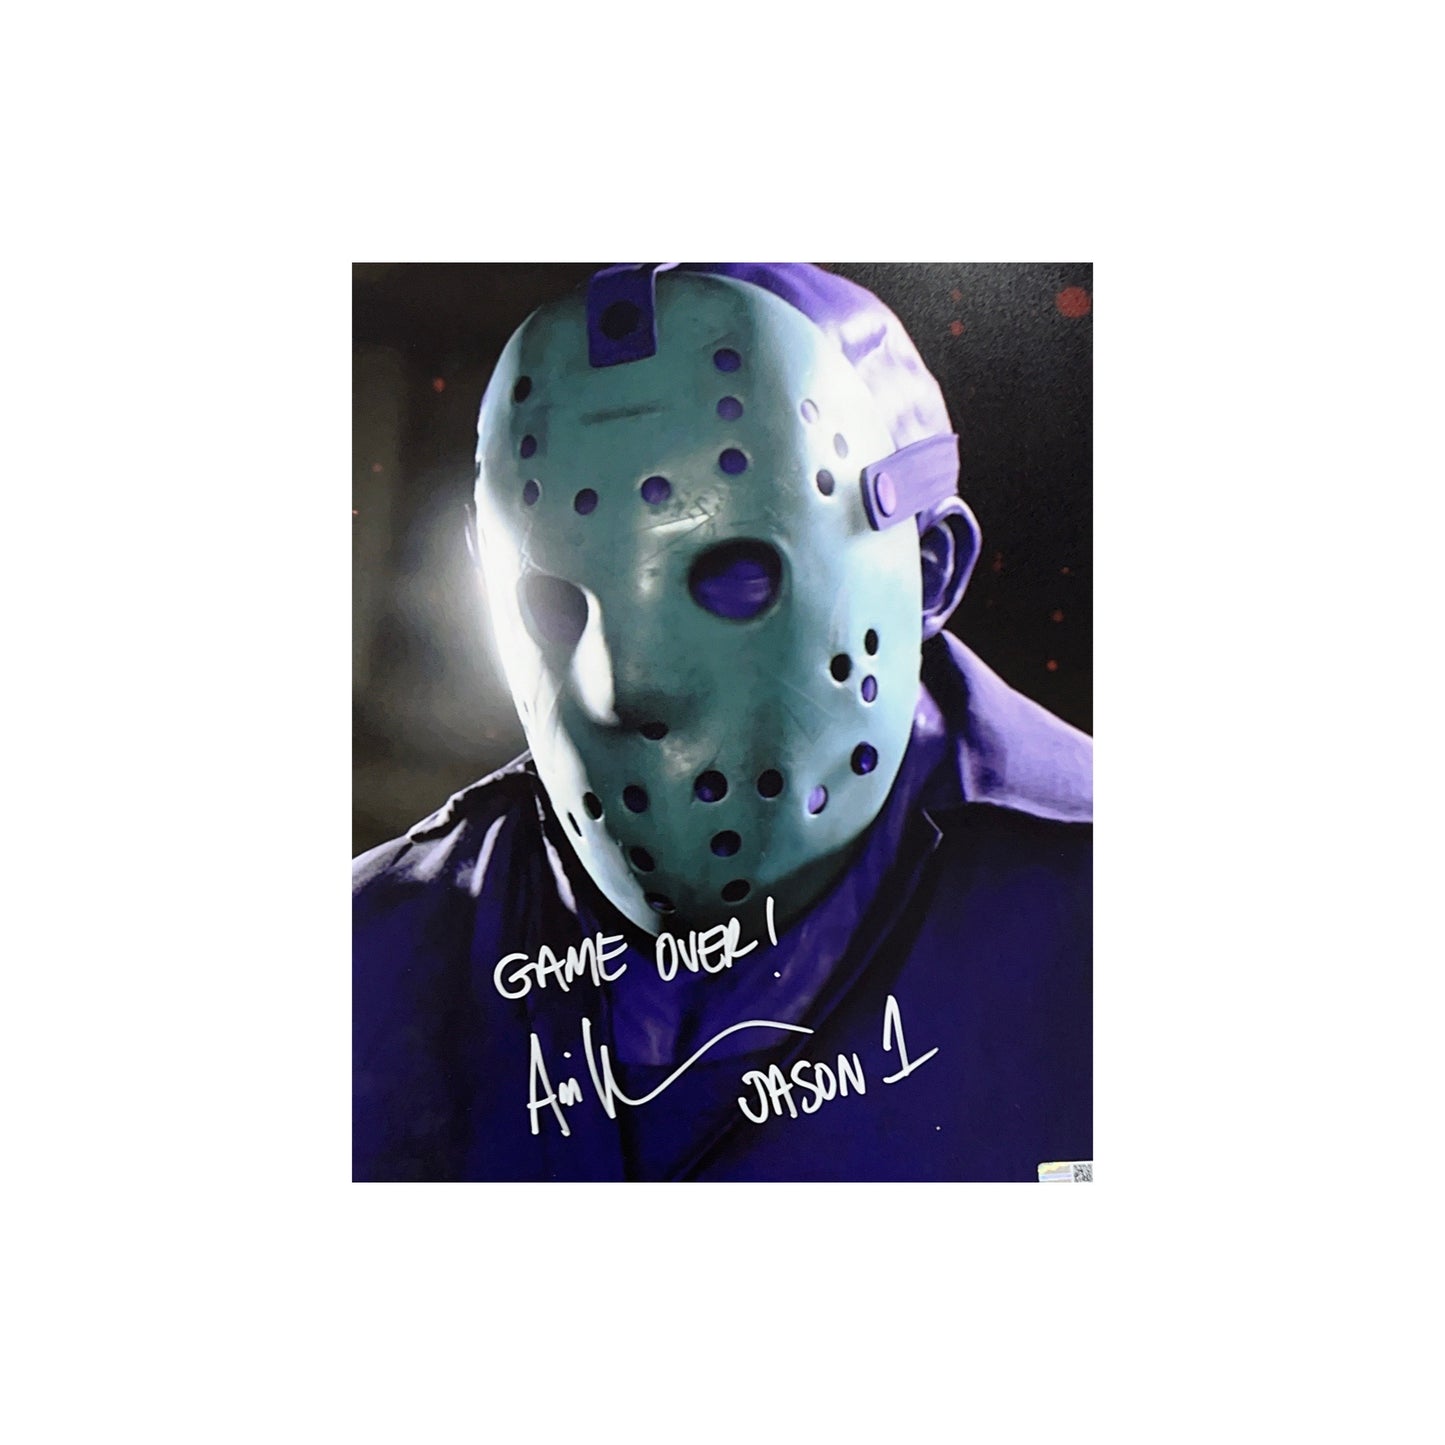 Ari Lehman Autographed Friday The 13th Close Up 11x14 "Game Over! Jason 1" Inscription Steiner CX